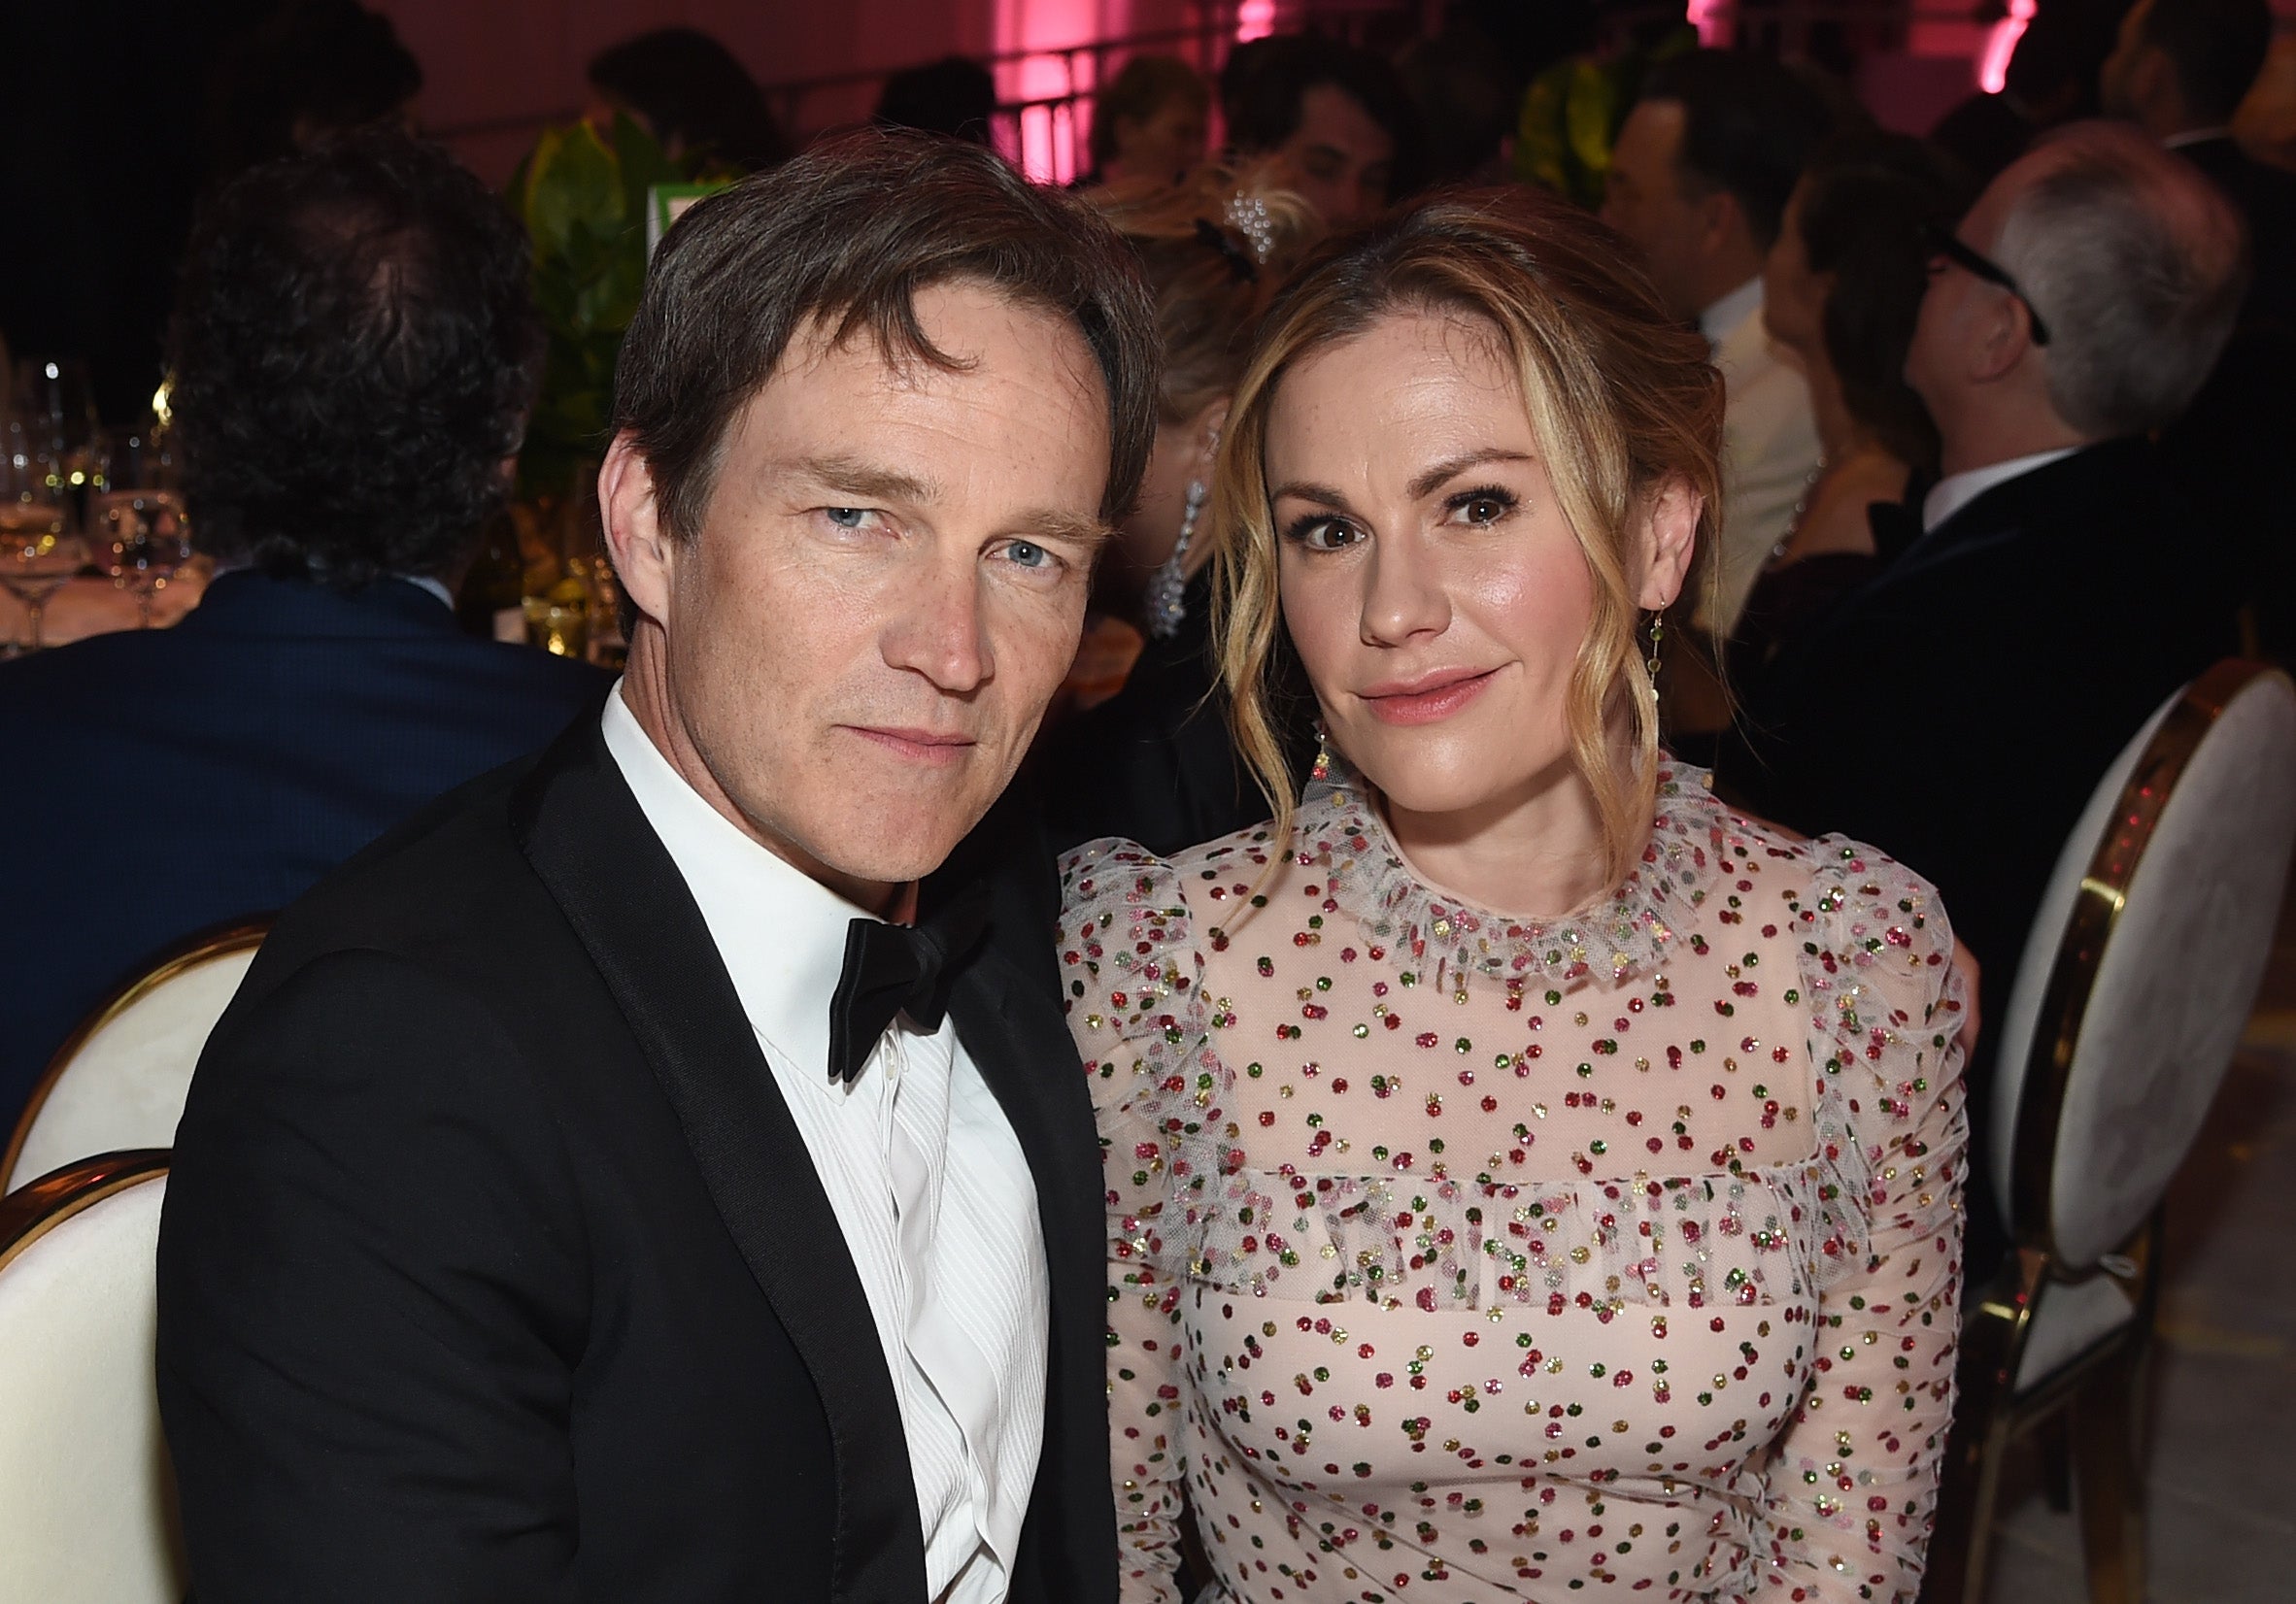 File image: Stephen Moyer and Anna Paquin at the 27th annual Elton John AIDS Foundation Academy Awards Viewing Party